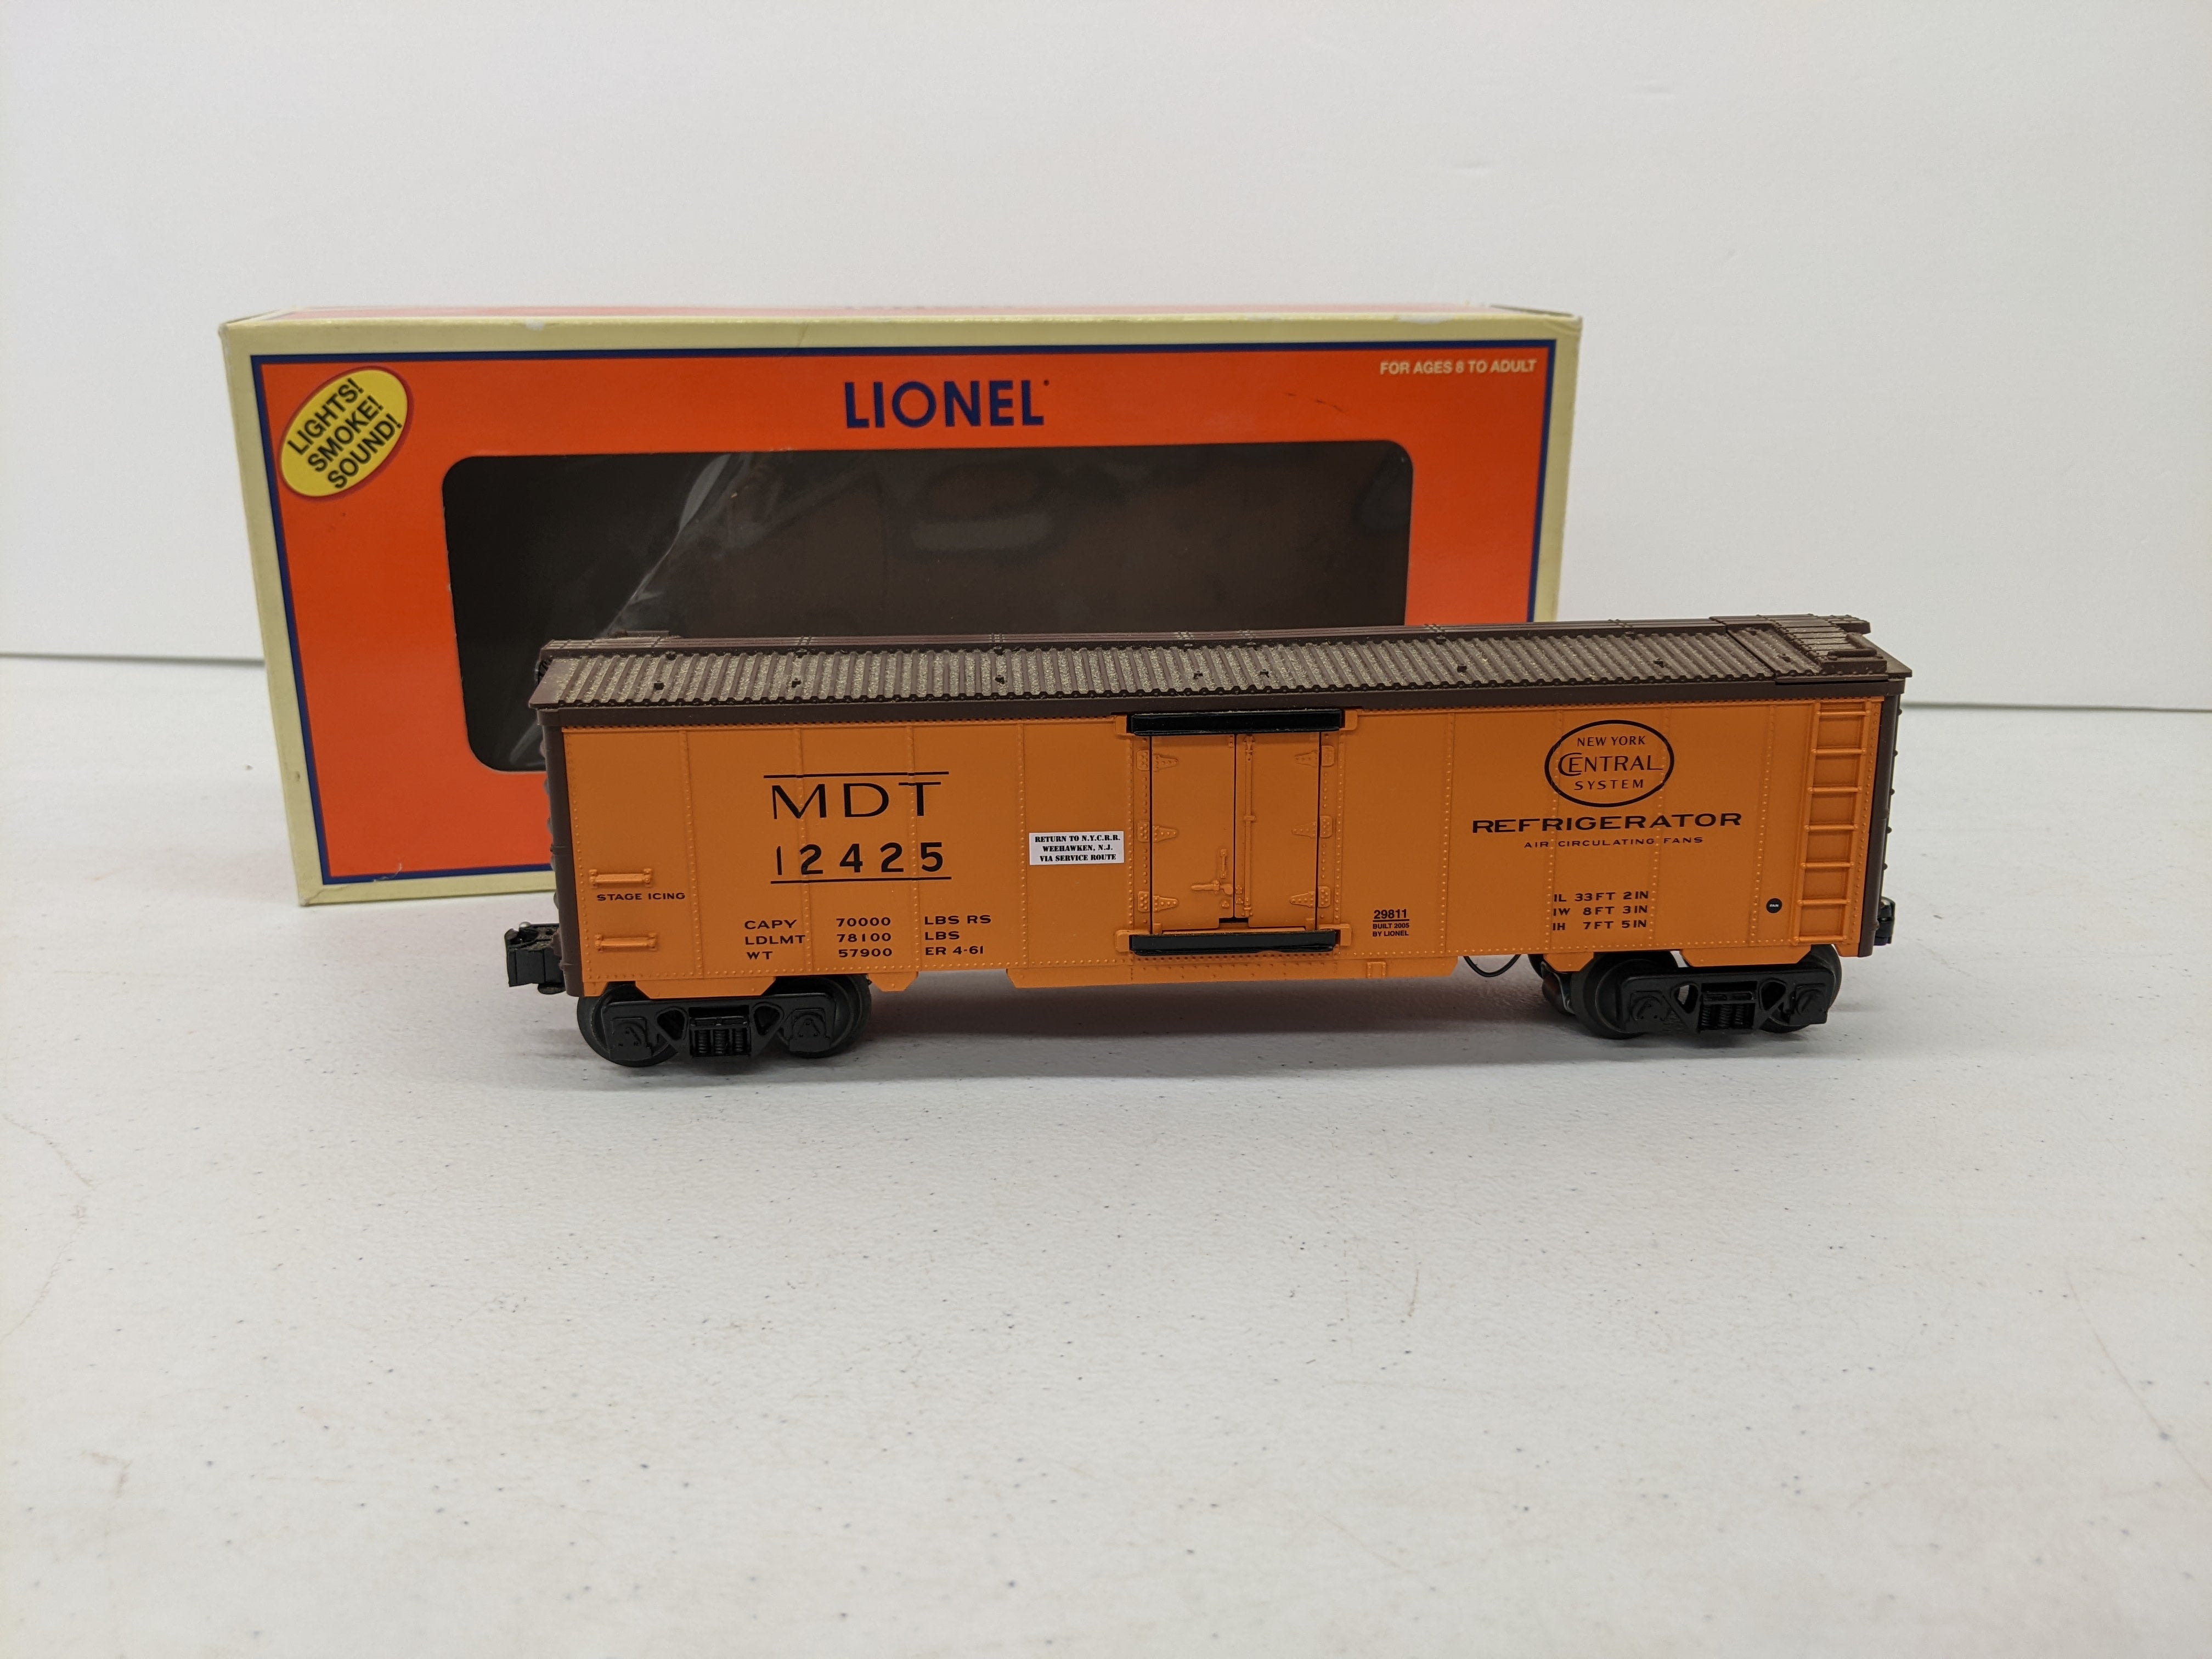 USED Lionel 6-29811 O Scale, Merchant's Despatch Transit Hot Box Reefer, New York Central MDT #12425, w/ Lights, Smoke +